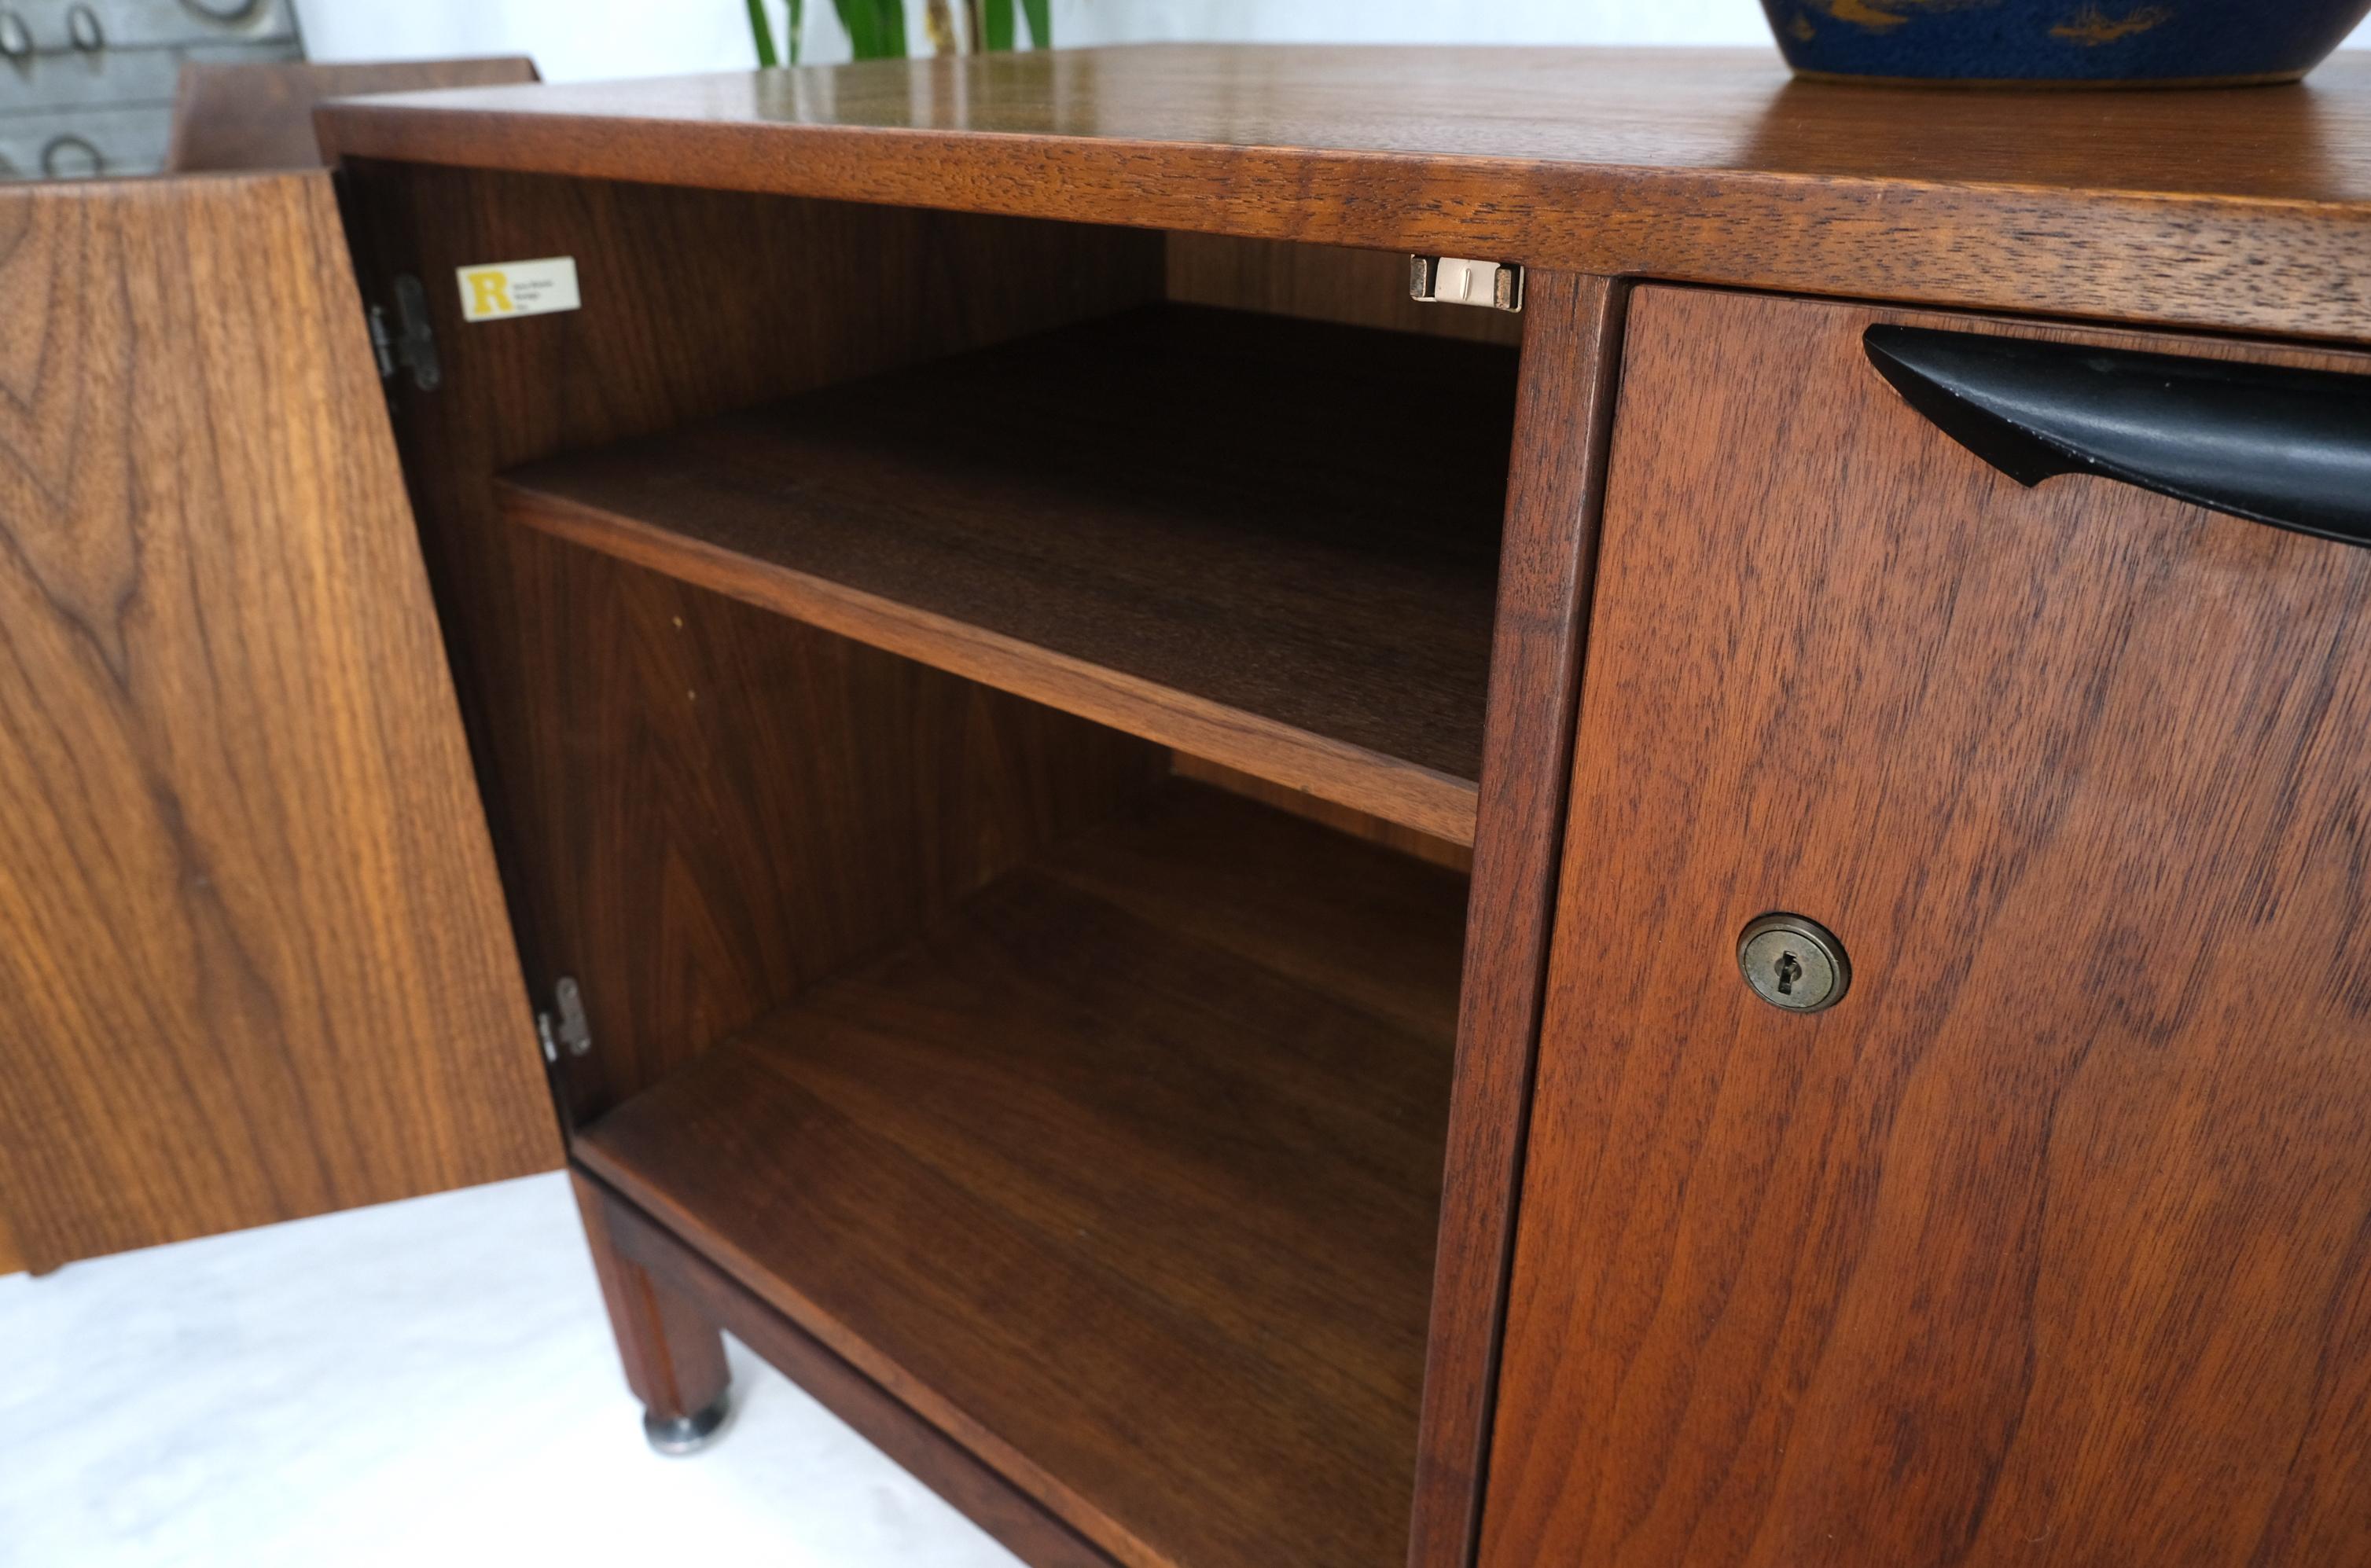 Jens Risom Small One Double Door Compartment Credenza Cabinet Adjustable Shelves In Good Condition For Sale In Rockaway, NJ